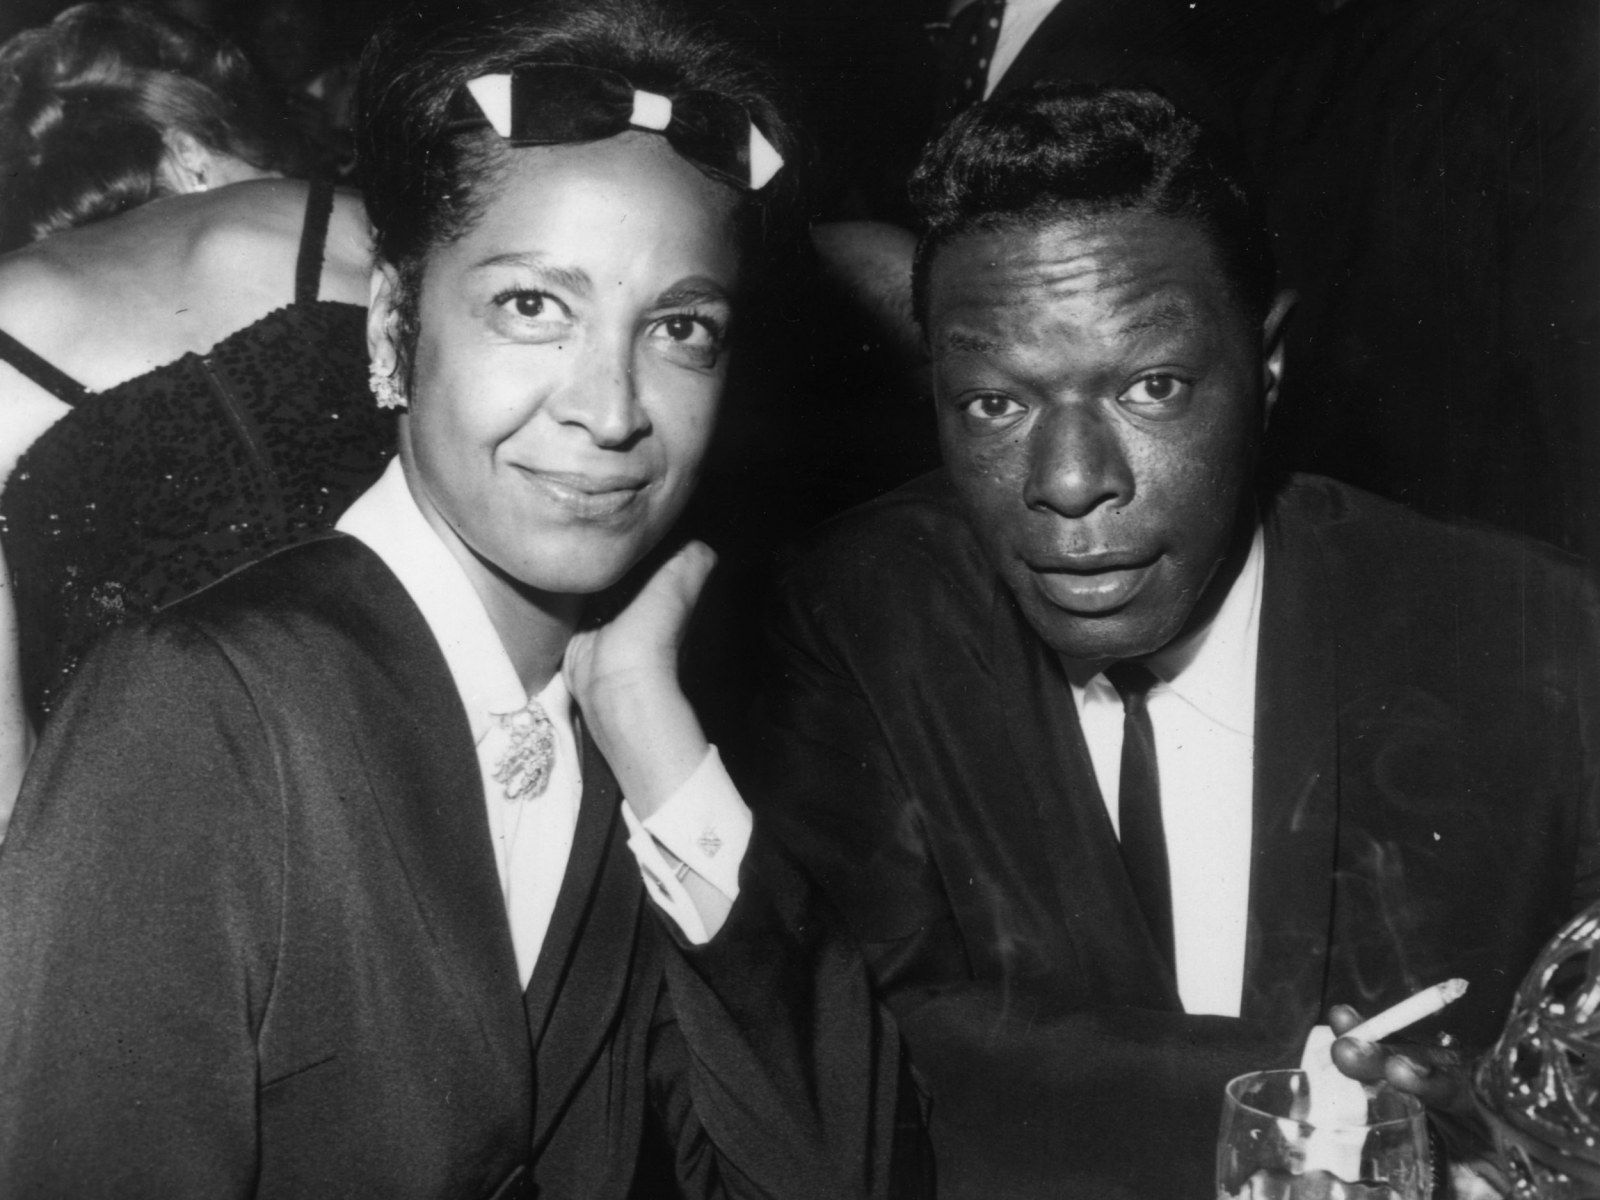 Nat King Cole at 100: His Music, Life and Legacy Remembered